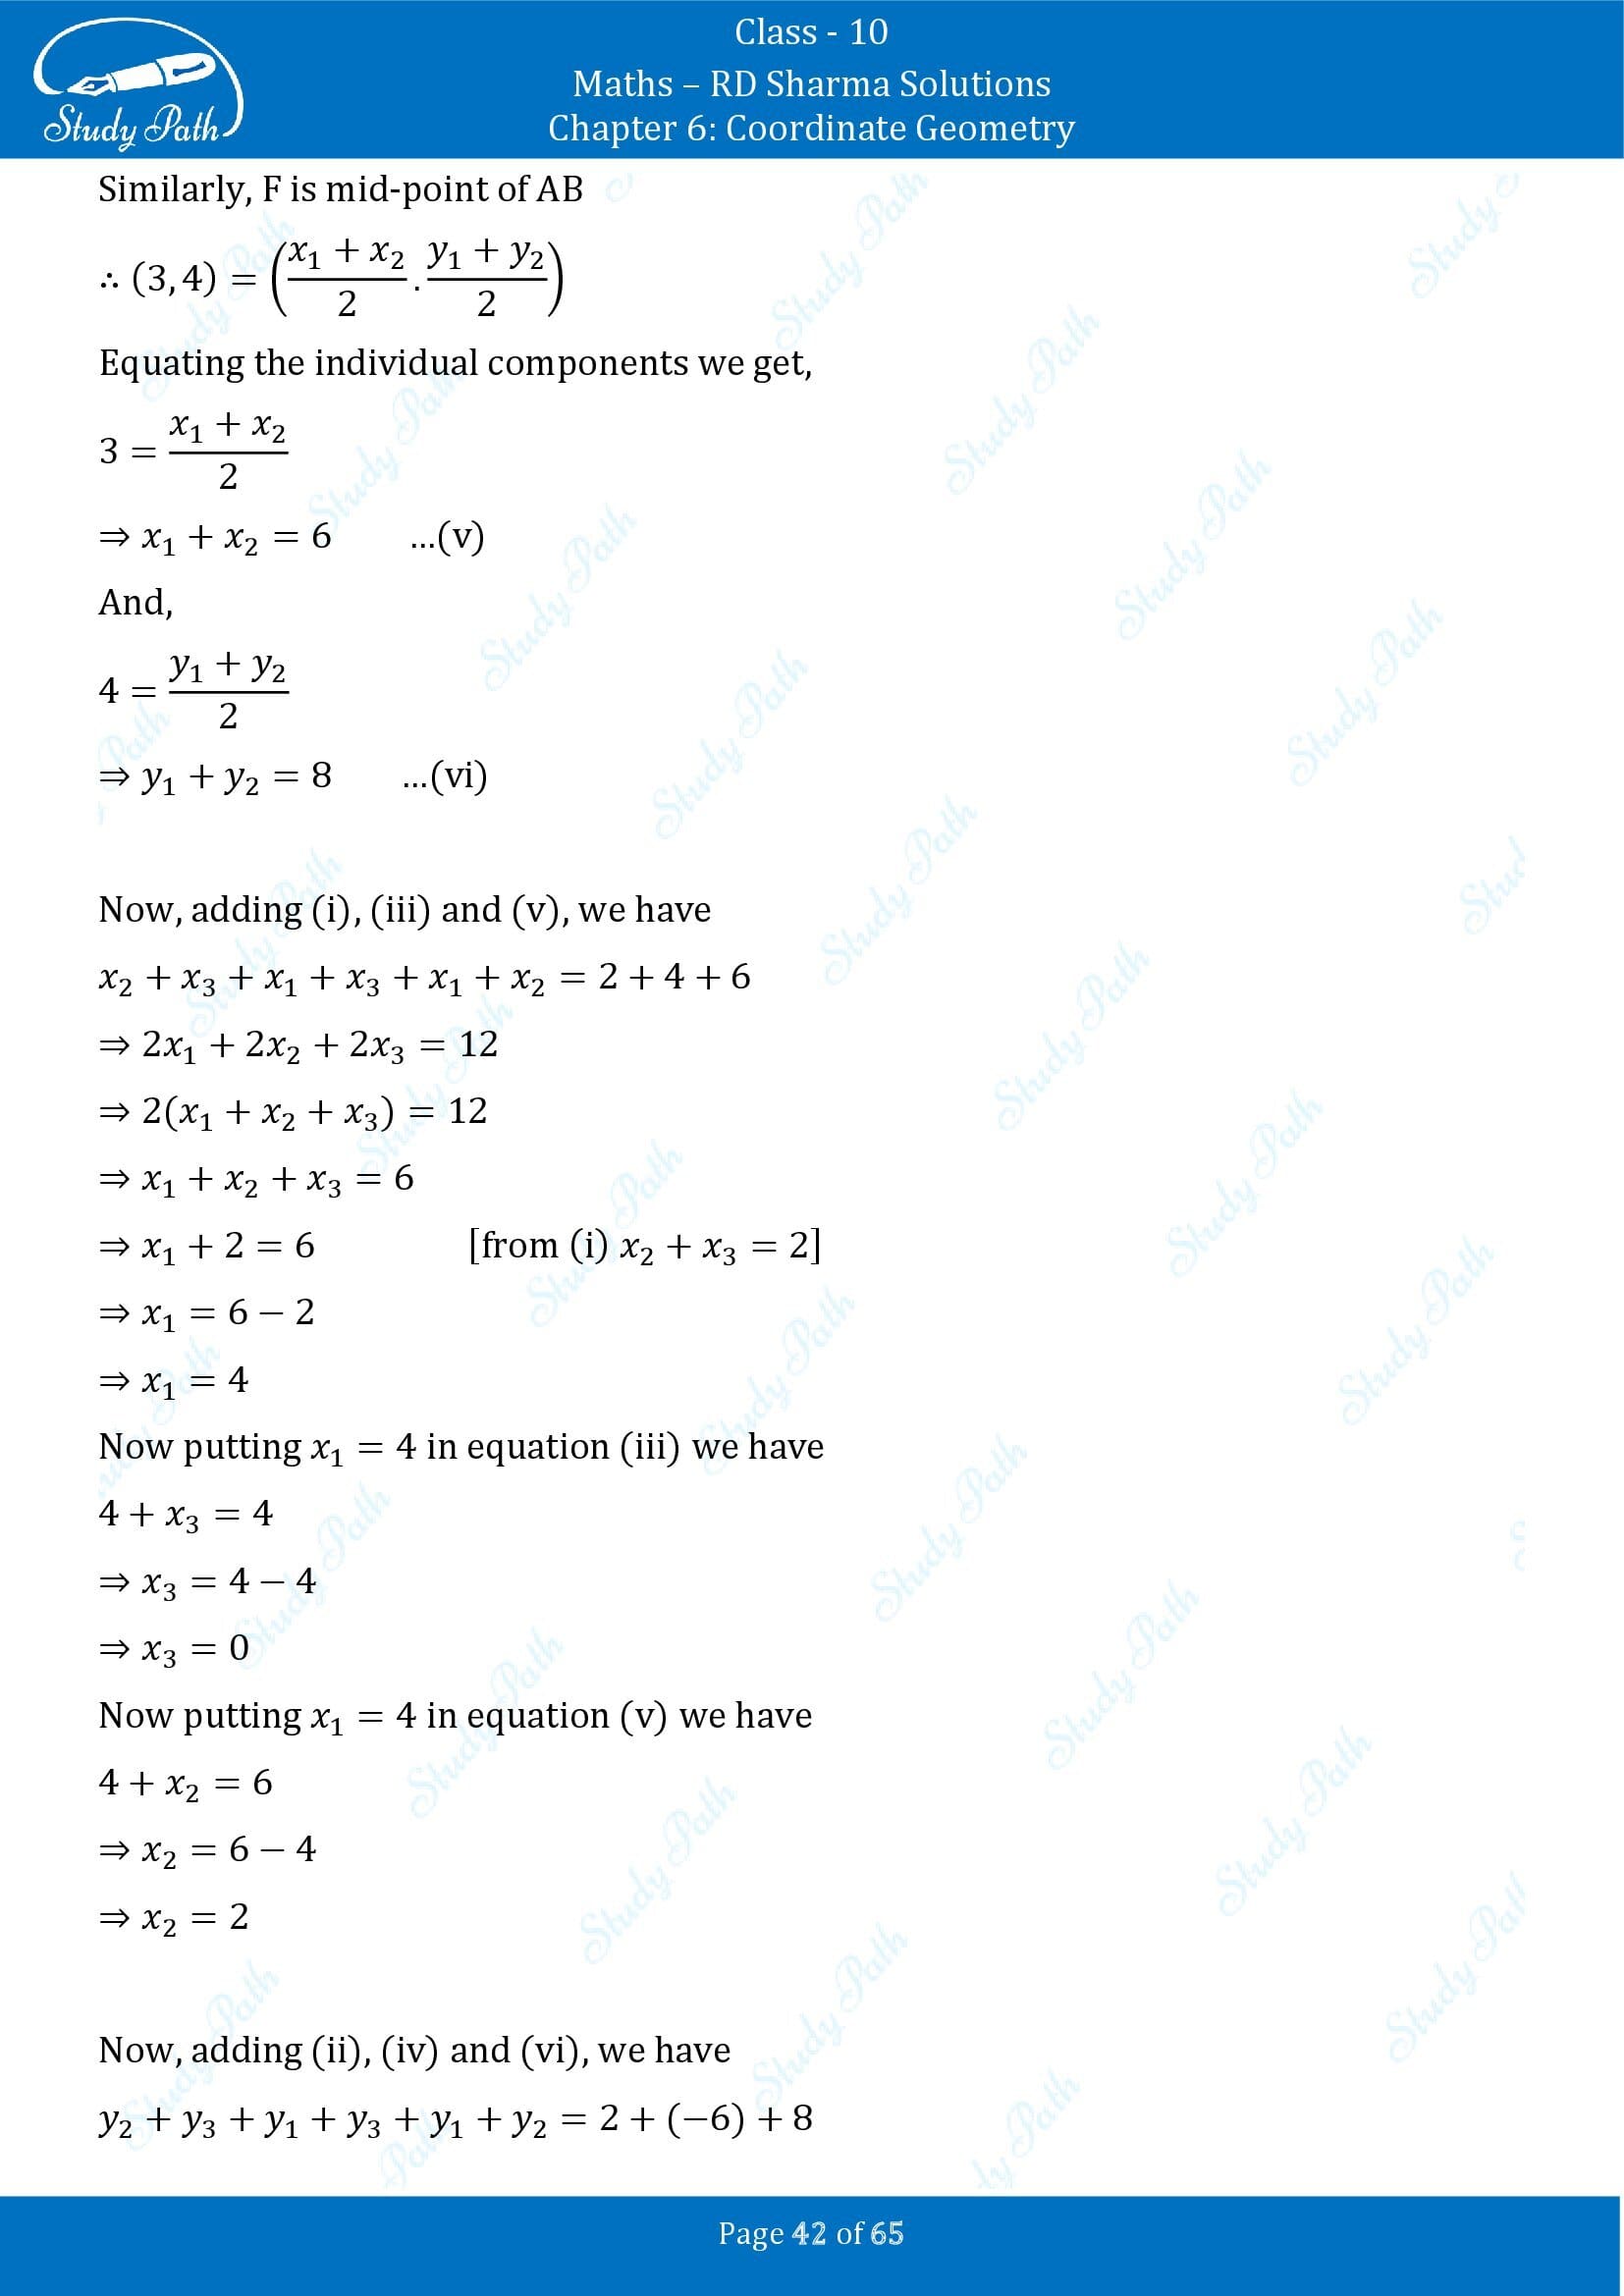 RD Sharma Solutions Class 10 Chapter 6 Coordinate Geometry Exercise 6.3 00042